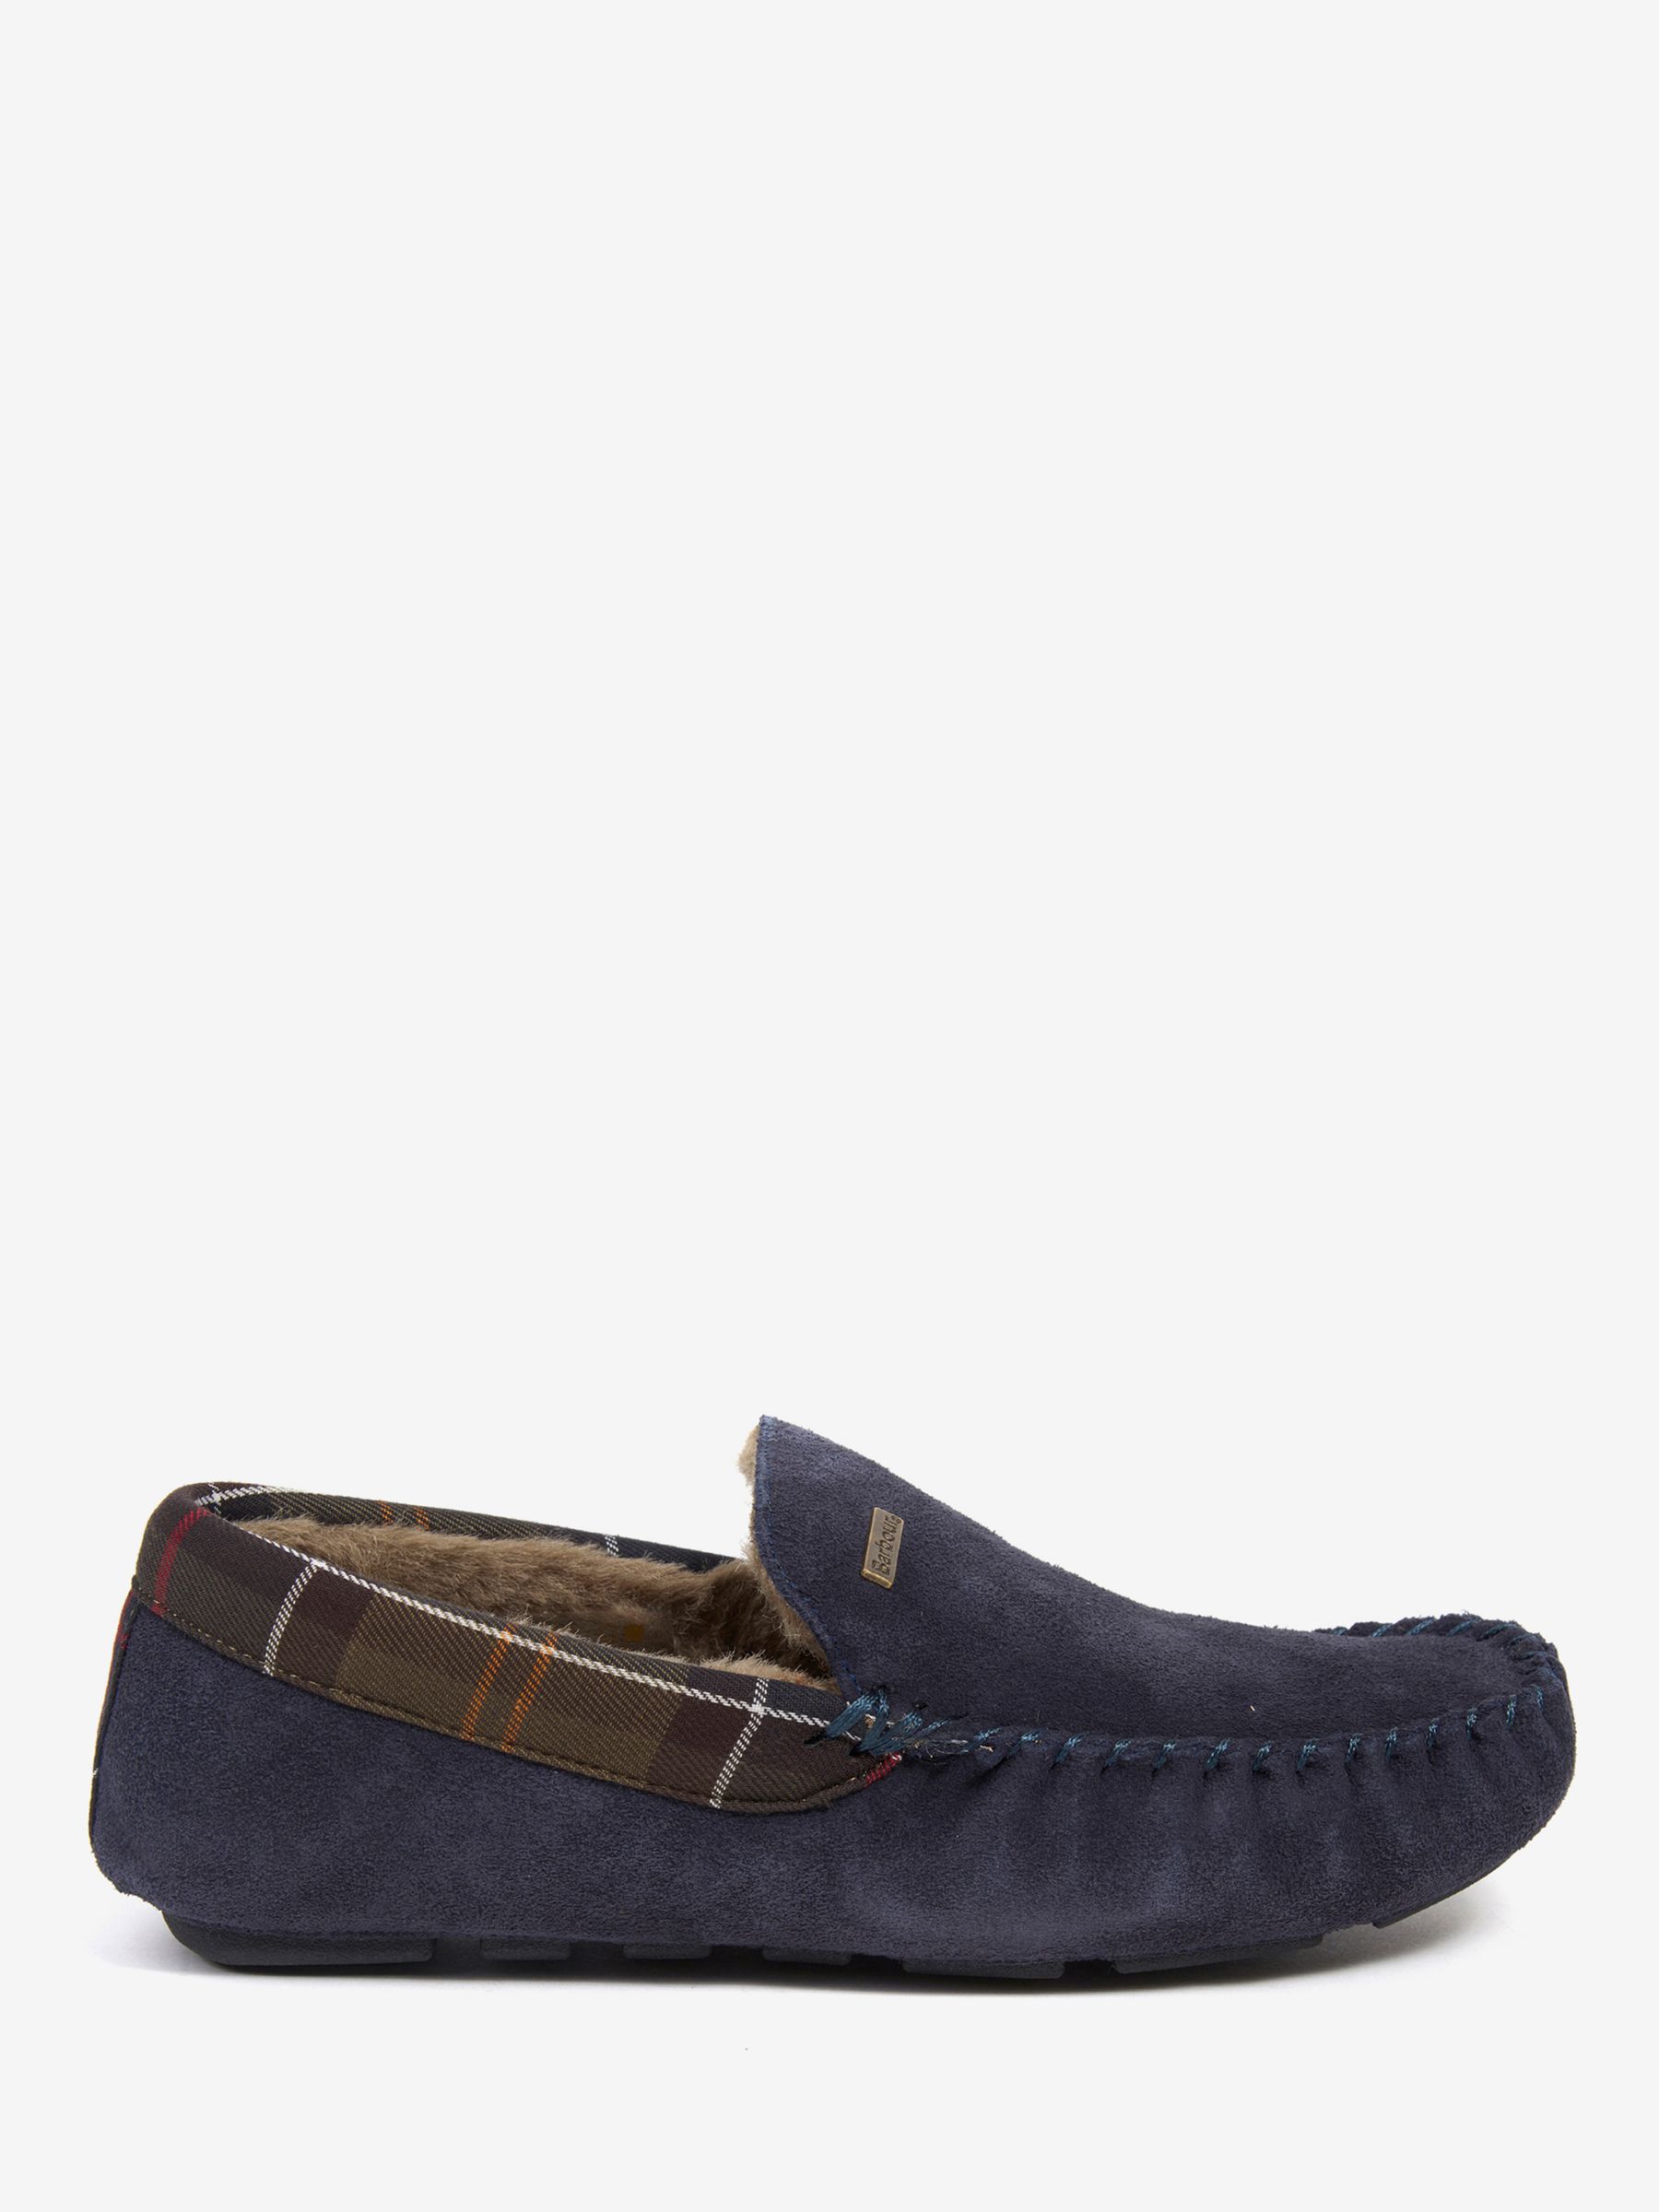 Barbour Monty Suede Slippers, Navy at 